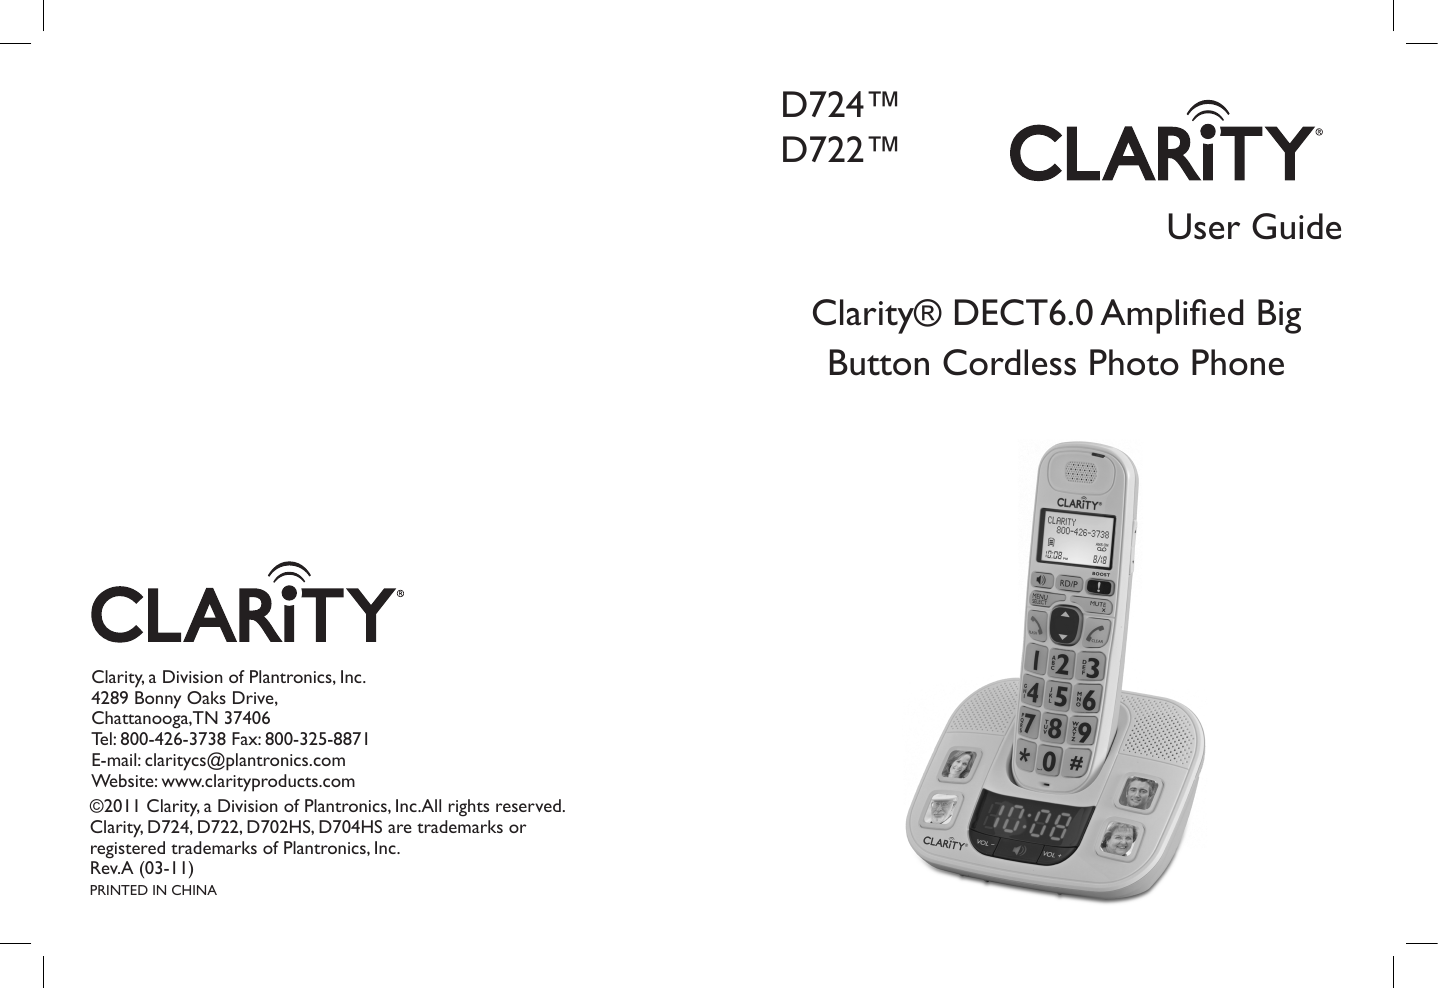 User GuideClarity, a Division of Plantronics, Inc.4289 Bonny Oaks Drive,Chattanooga,TN 37406Tel: 800-426-3738 Fax: 800-325-8871E-mail: claritycs@plantronics.com Website: www.clarityproducts.com©2011 Clarity, a Division of Plantronics, Inc.All rights reserved. Clarity, D724, D722, D702HS, D704HS are trademarks or registered trademarks of Plantronics, Inc.Rev.A (03-11)PRINTED IN CHINAD724™D722™Clarity® DECT6.0 Amplied Big Button Cordless Photo Phone 